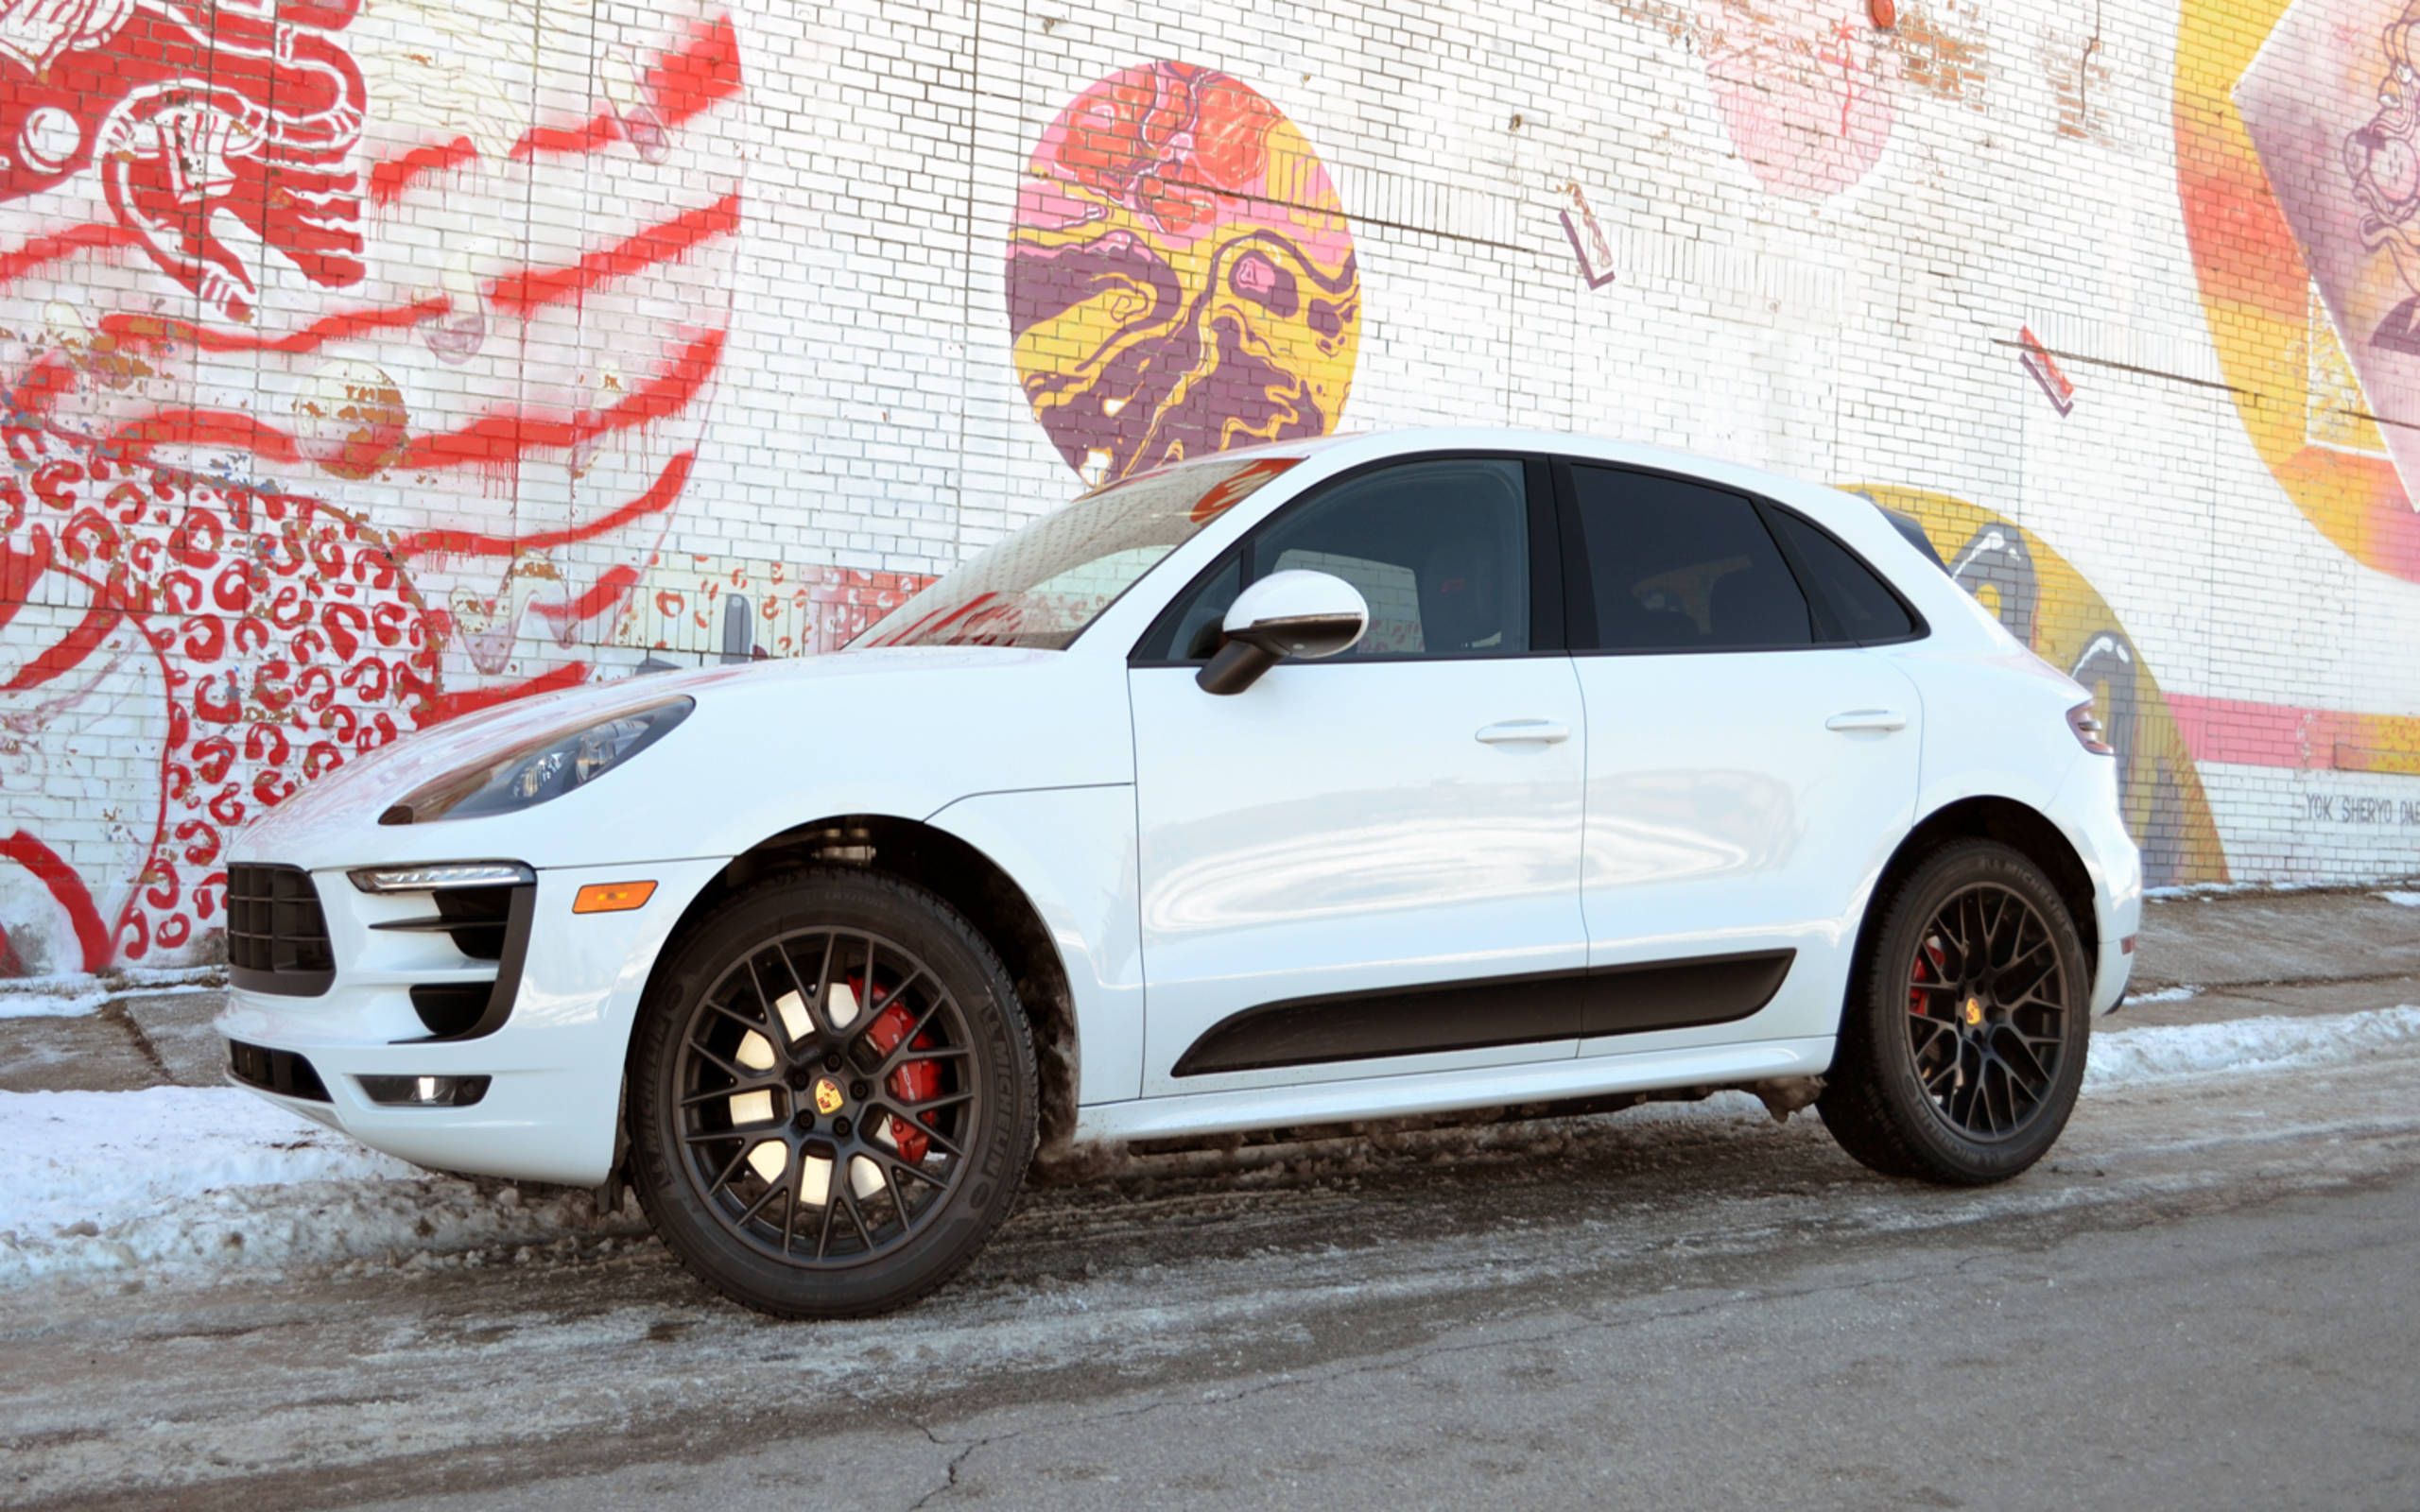 2017 Porsche Macan GTS review: The driver's crossover